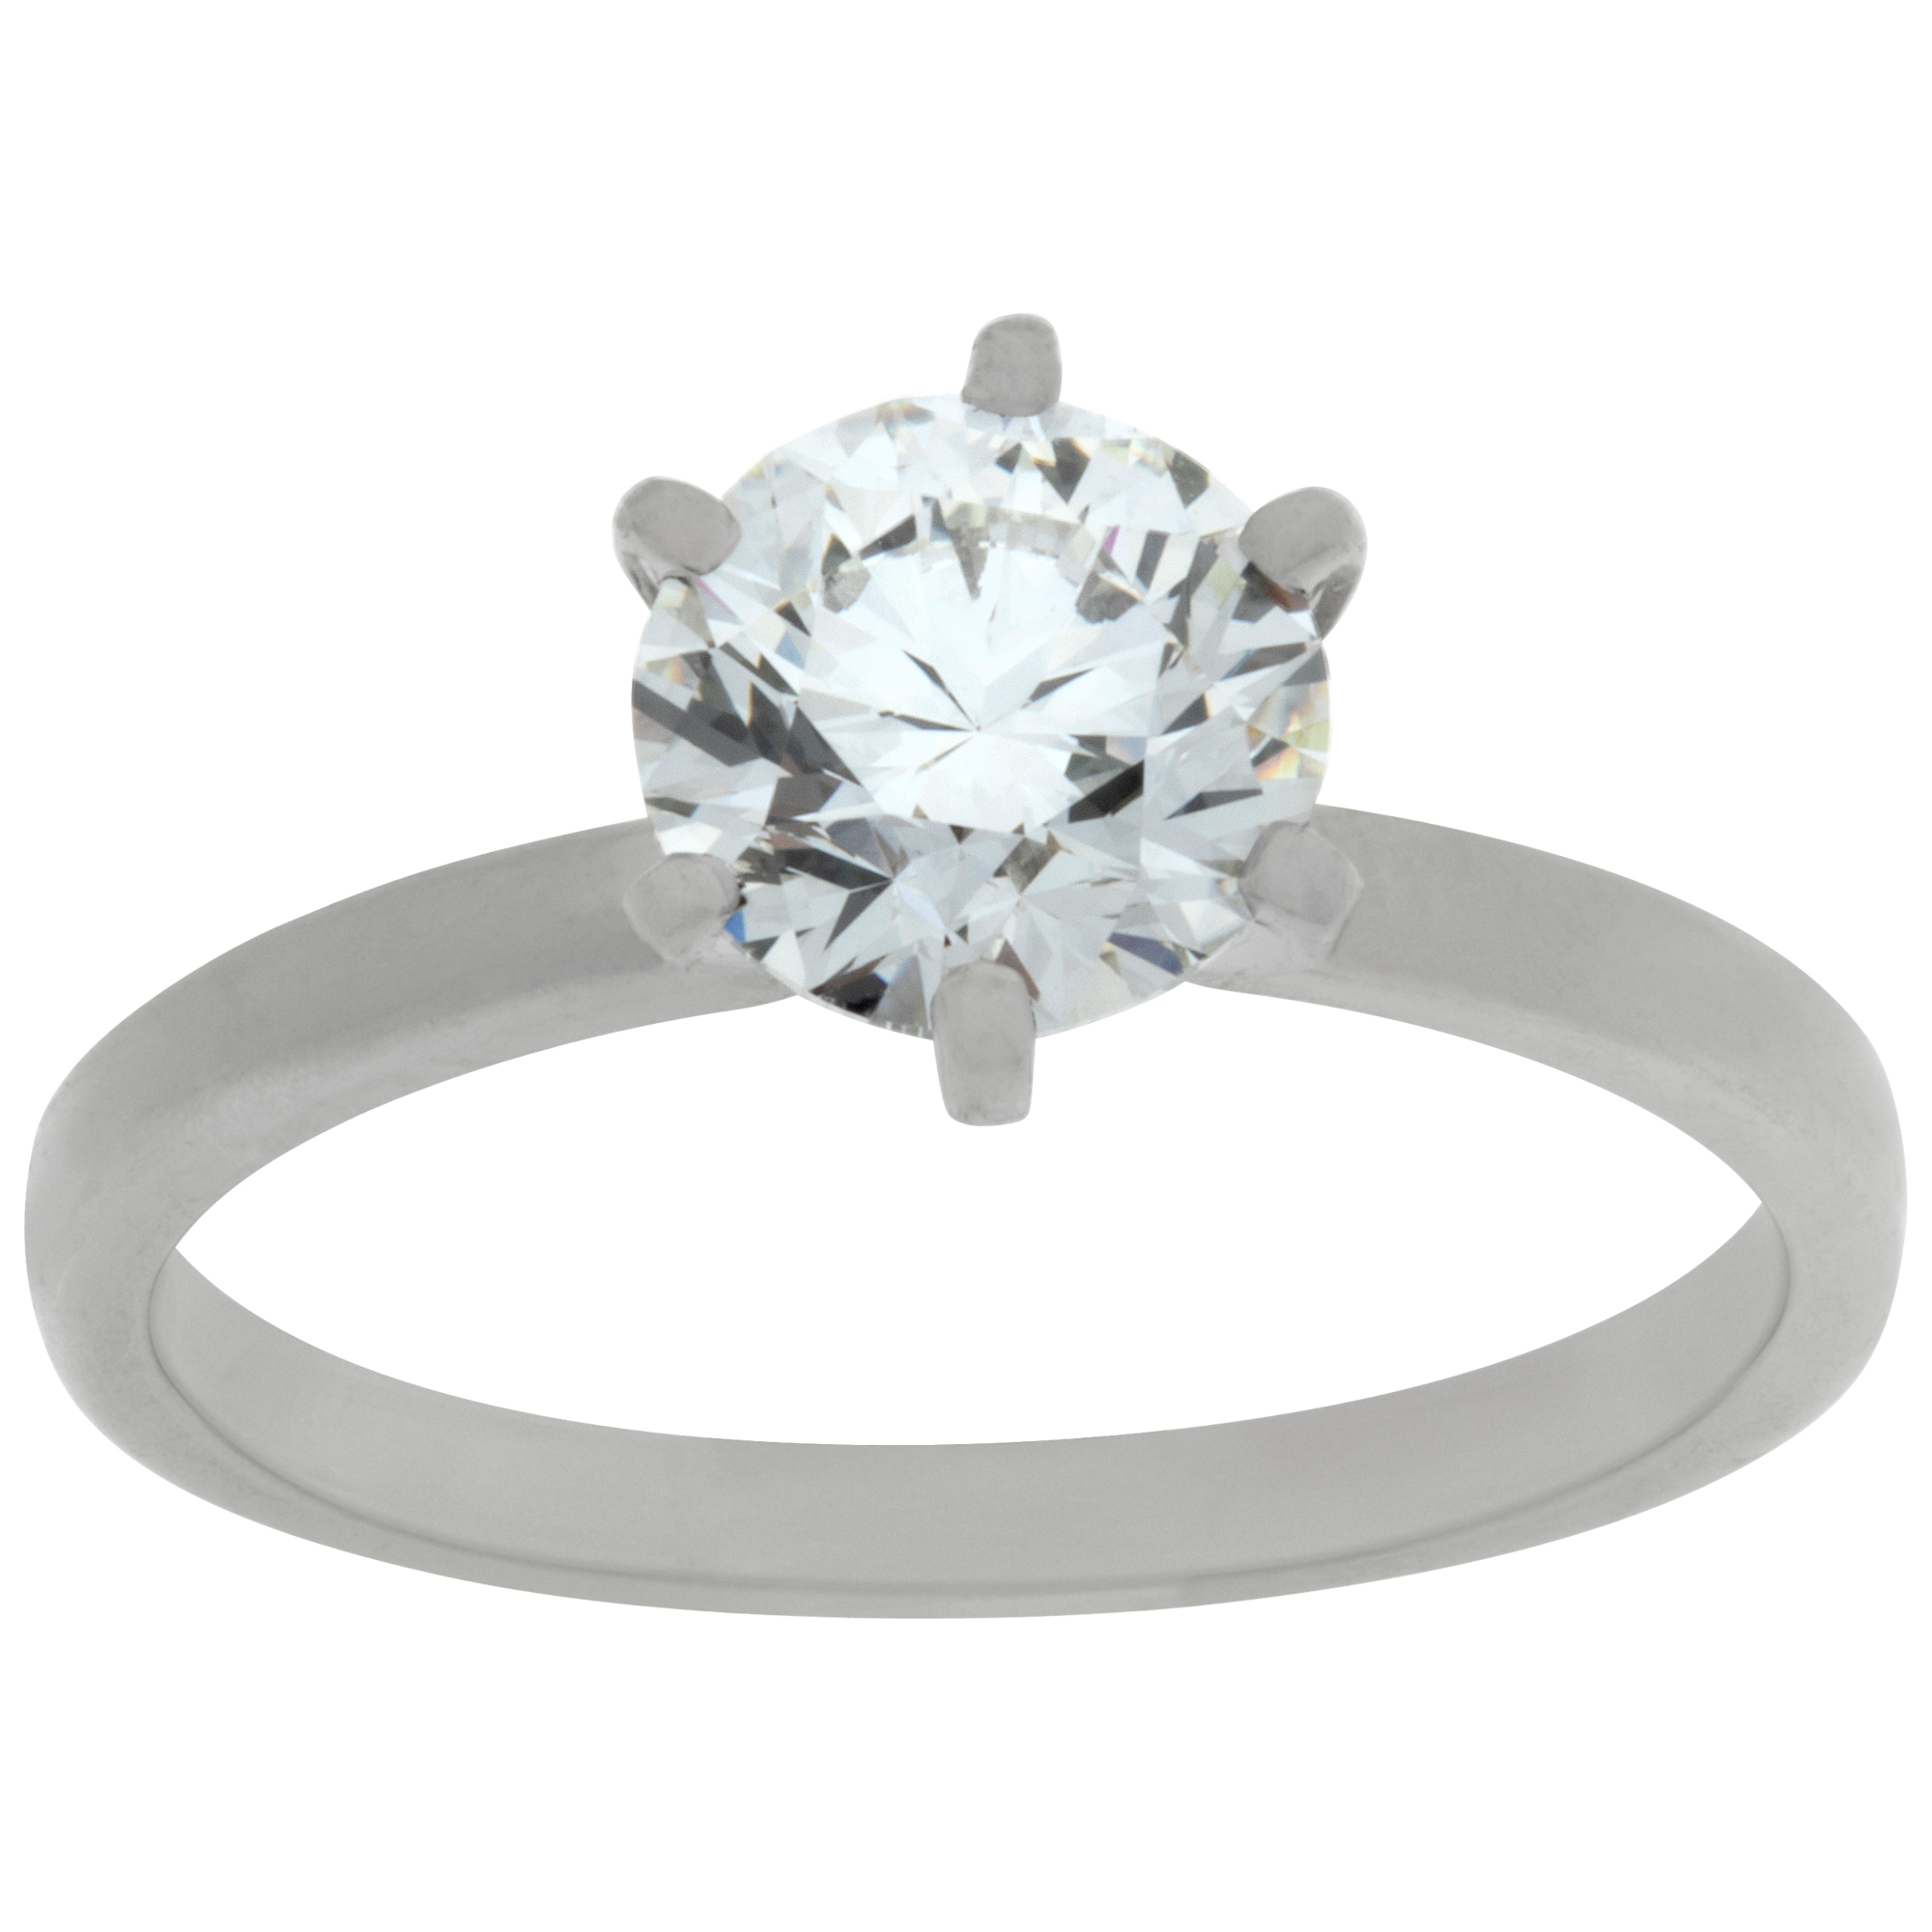 GIA certified round brilliant cut 1.01 carat diamond (G color, VS2 clarity, Triple excelent) solitaire ring image 1